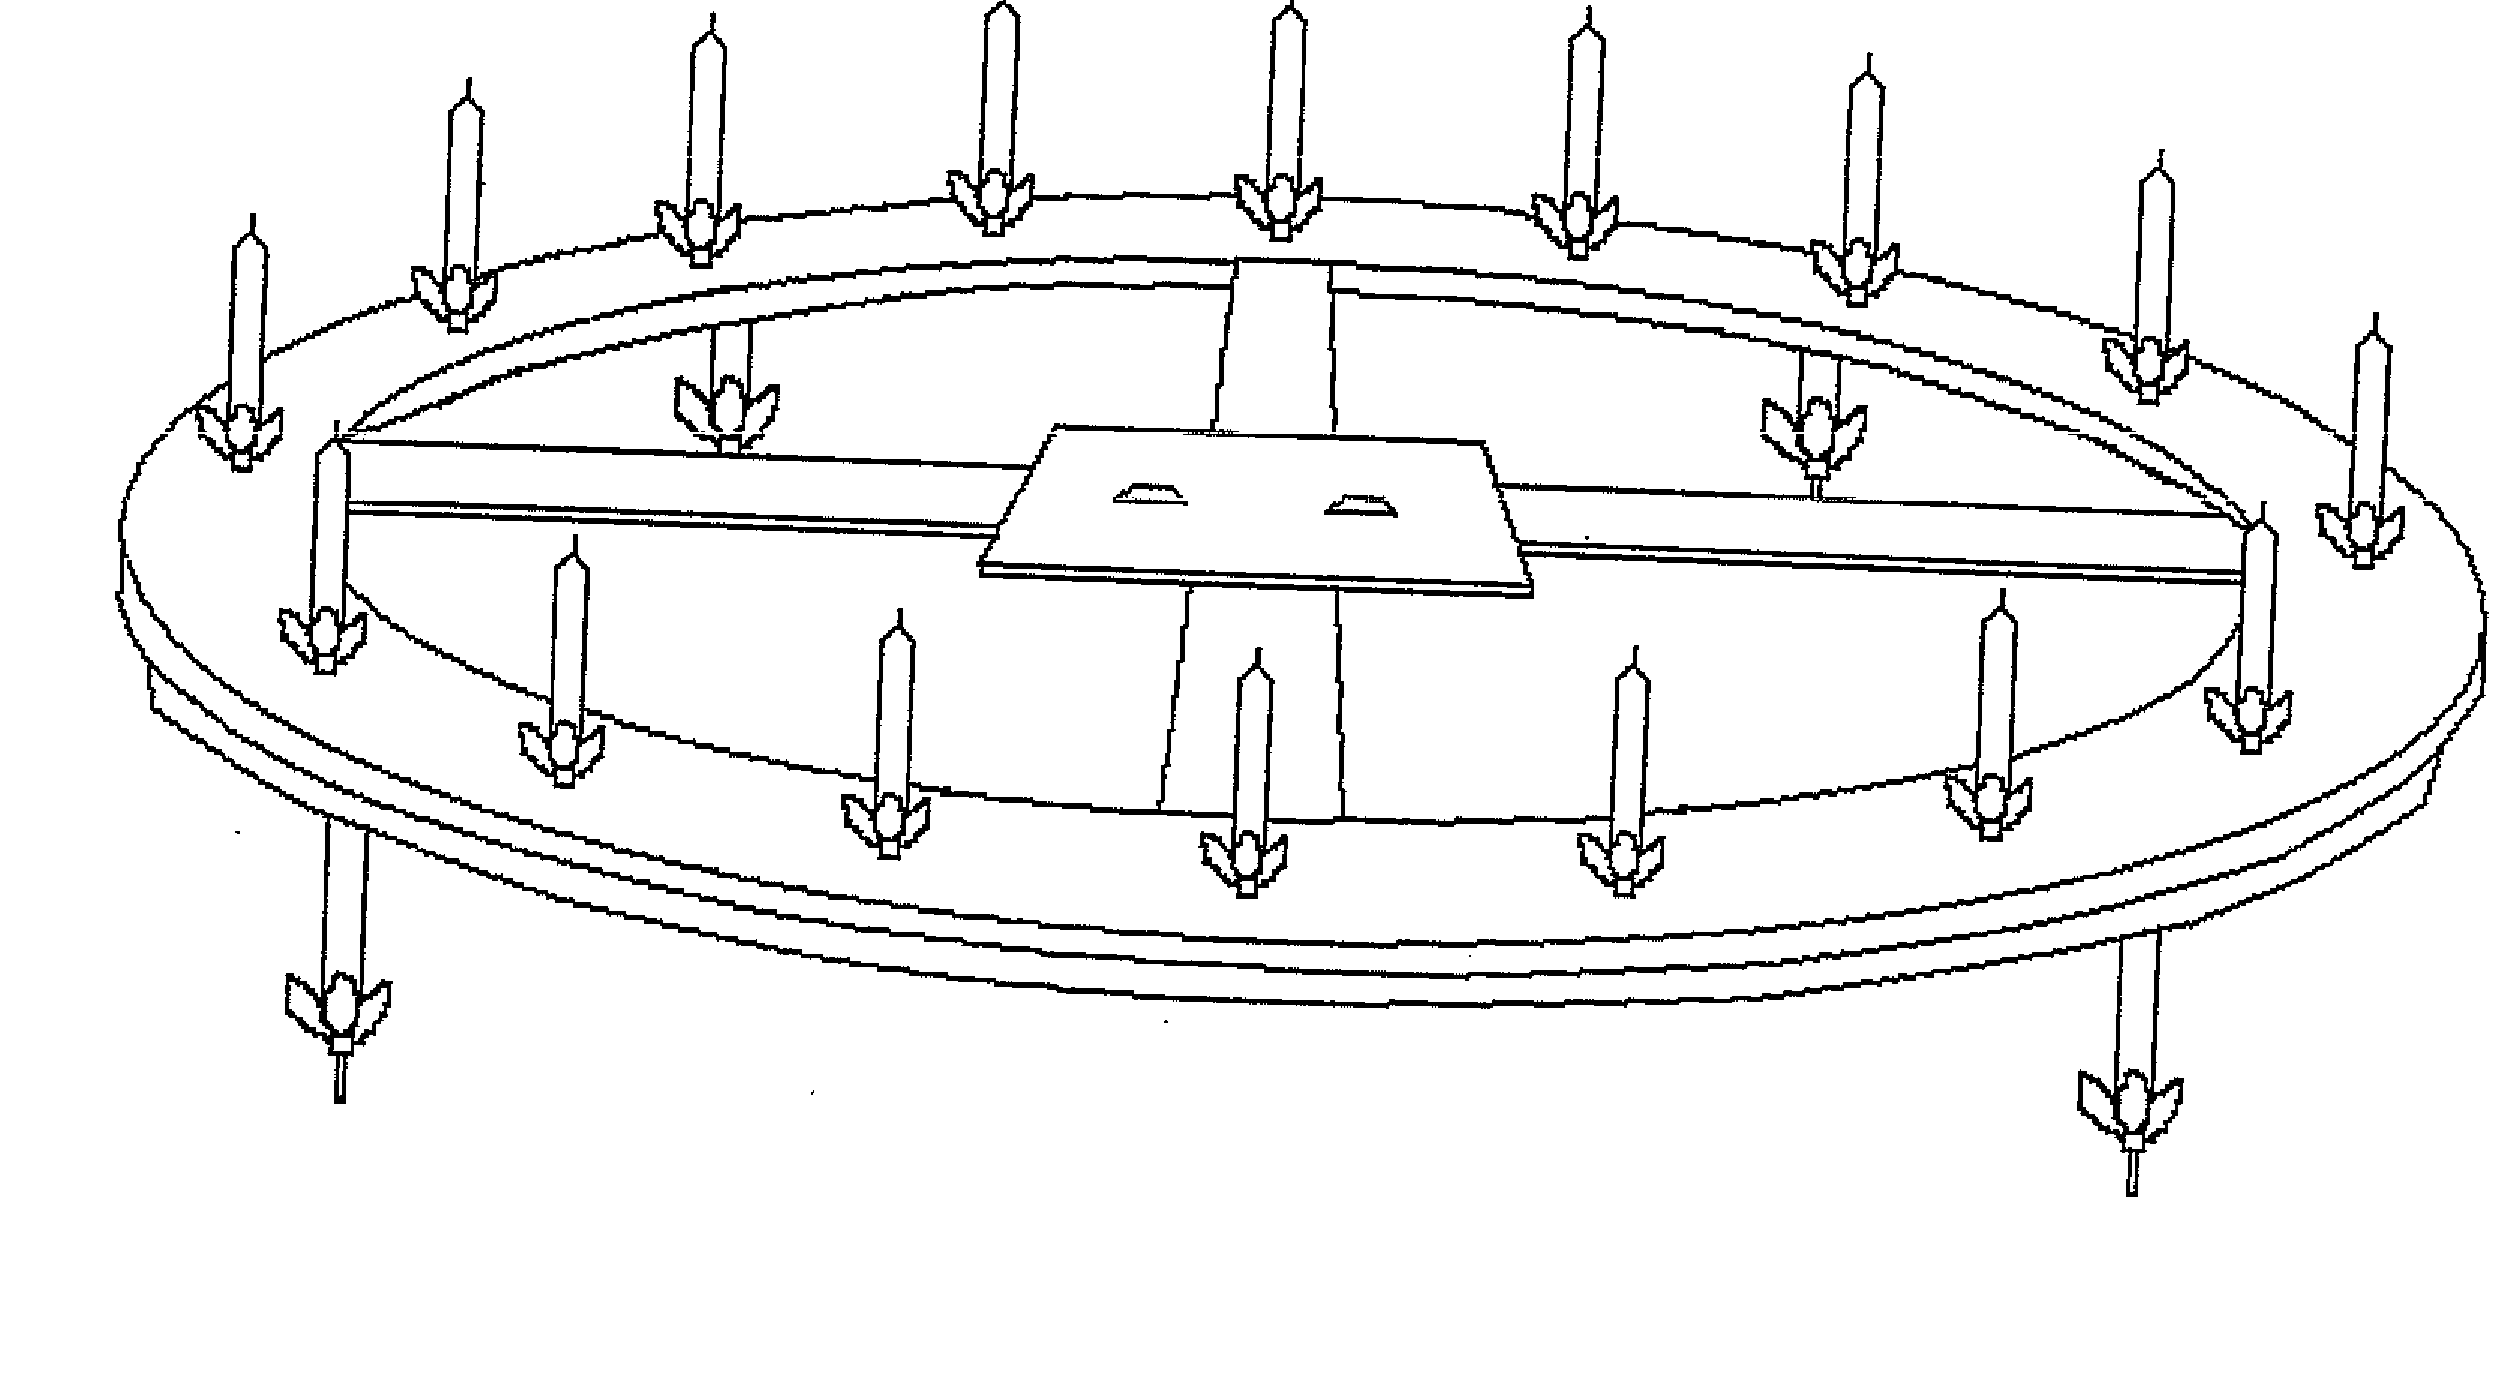 Device For Placing And Removing Birthday Candles at a Single Time On/From The Cake Regardless Of The Number of Candles